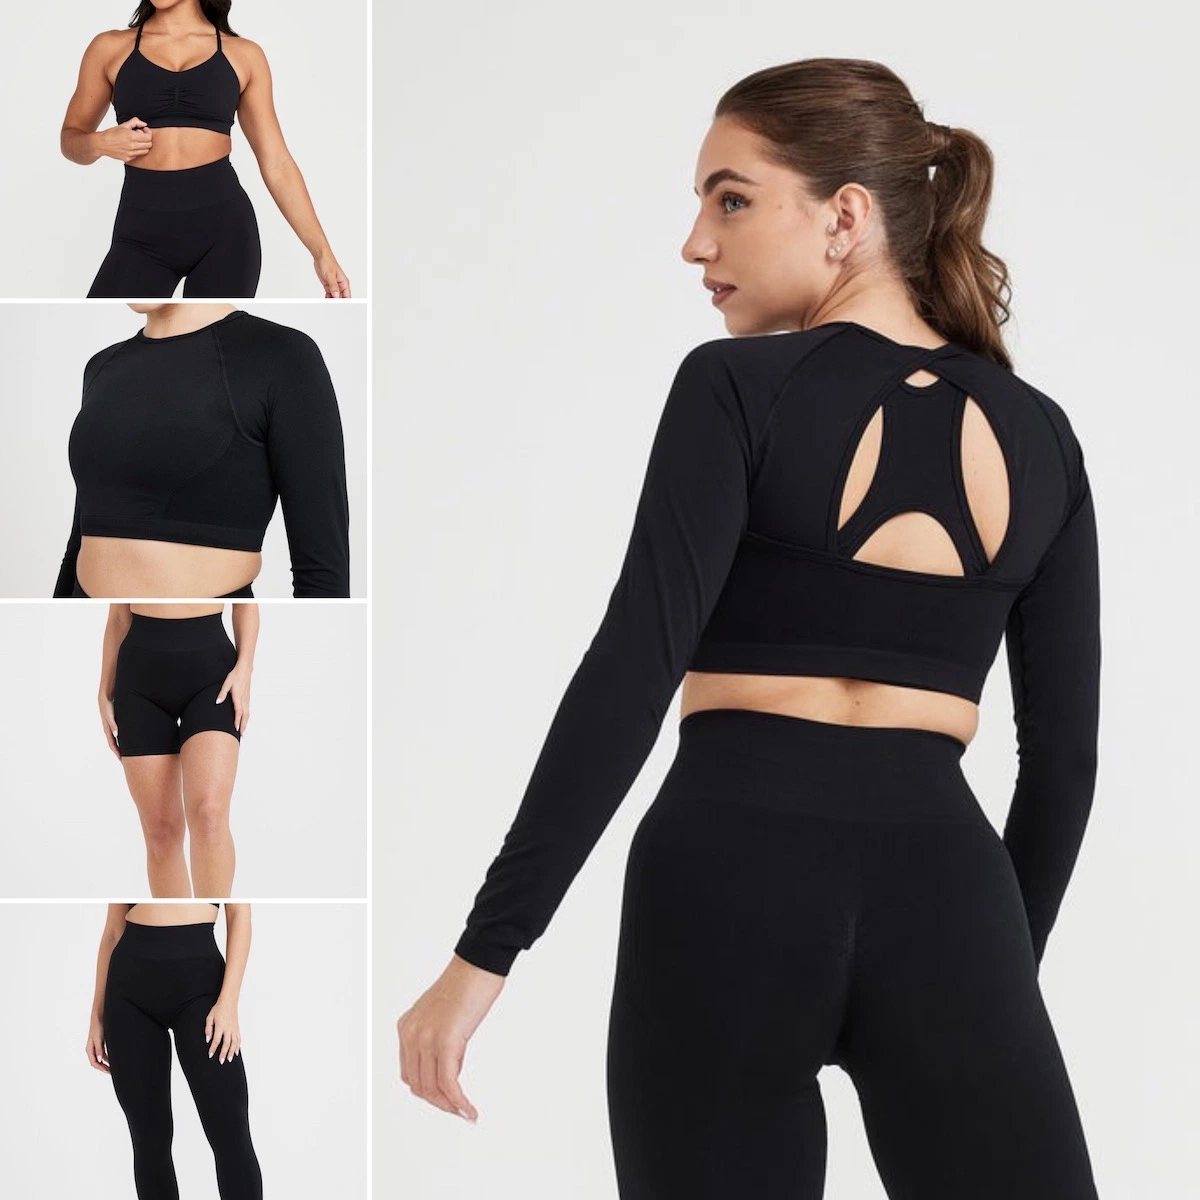 Wholesale/Supplier 6 Piece Exqusite Sexy Open Back Seamless Yoga Workout Clothes for Women, Custom Gym Bra + Crop Top + Running Shorts + Leggings Quality Activewear Set